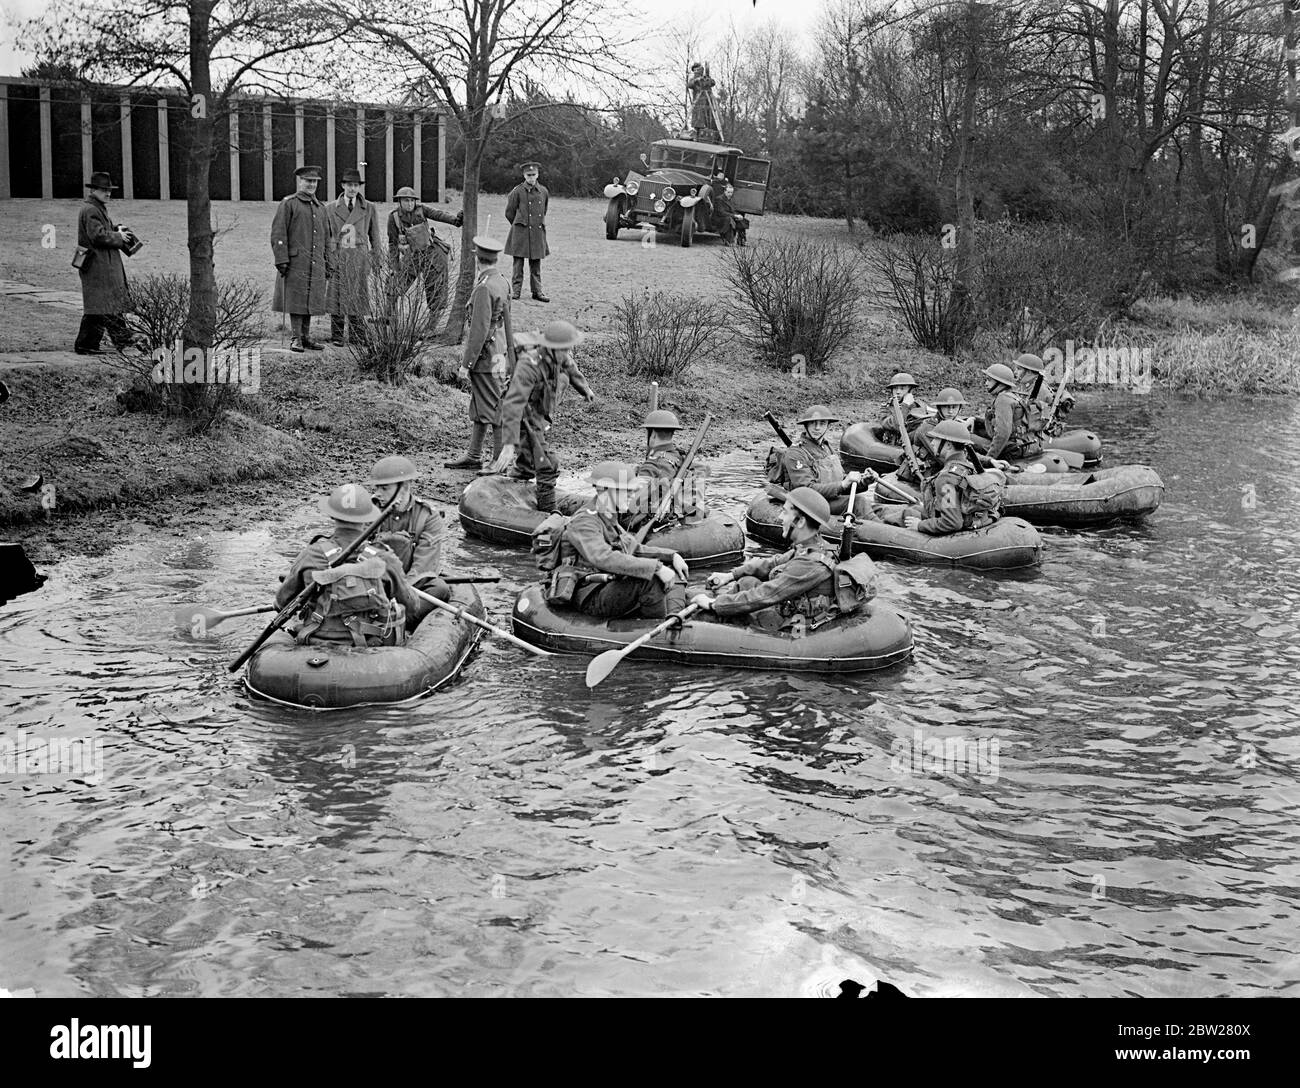 Troops ford Lake in aero boats at Aldershot demonstration. Latest equipment and training methods of infantry detachments of the British Army demonstrated by the first Battlalion the South Staffordshire Regiment in a series of exercises at Mytchett, near Aldershot, Hampshire. Photo shows, , troops fording Mytchatt Lake in pneumatic Aero Boats. The boats, which can be folded into a small space, carry two men with their equipment. 21 January 1938 Stock Photo